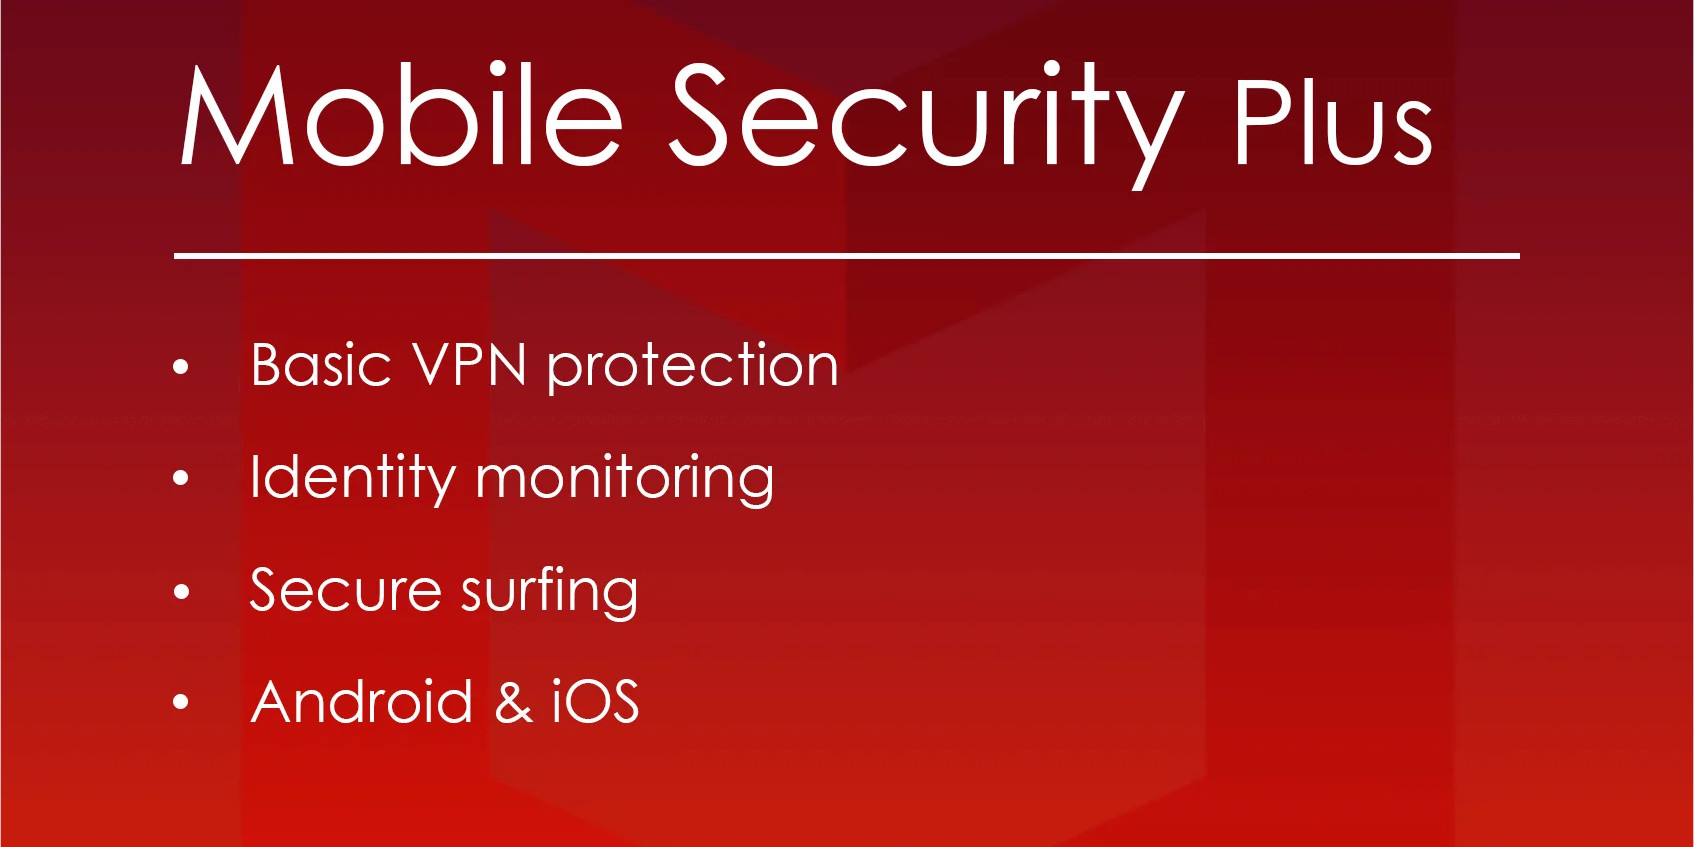 McAfee Mobile Security Plus VPN Key (1 Year / Unlimited Devices), 6.75 usd